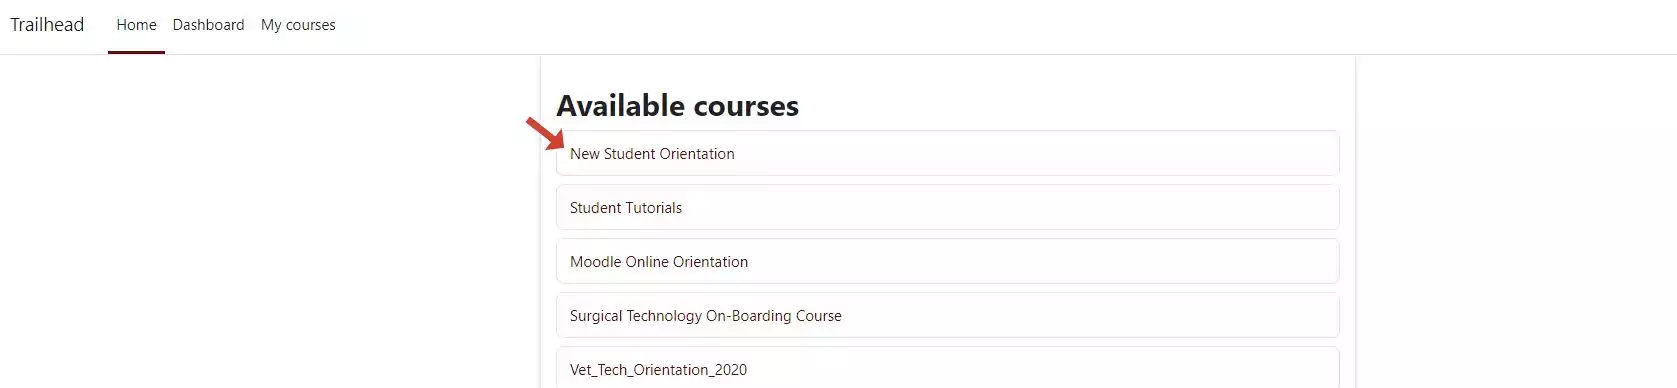 Image depicting the list of courses that are available under the "home" section. 